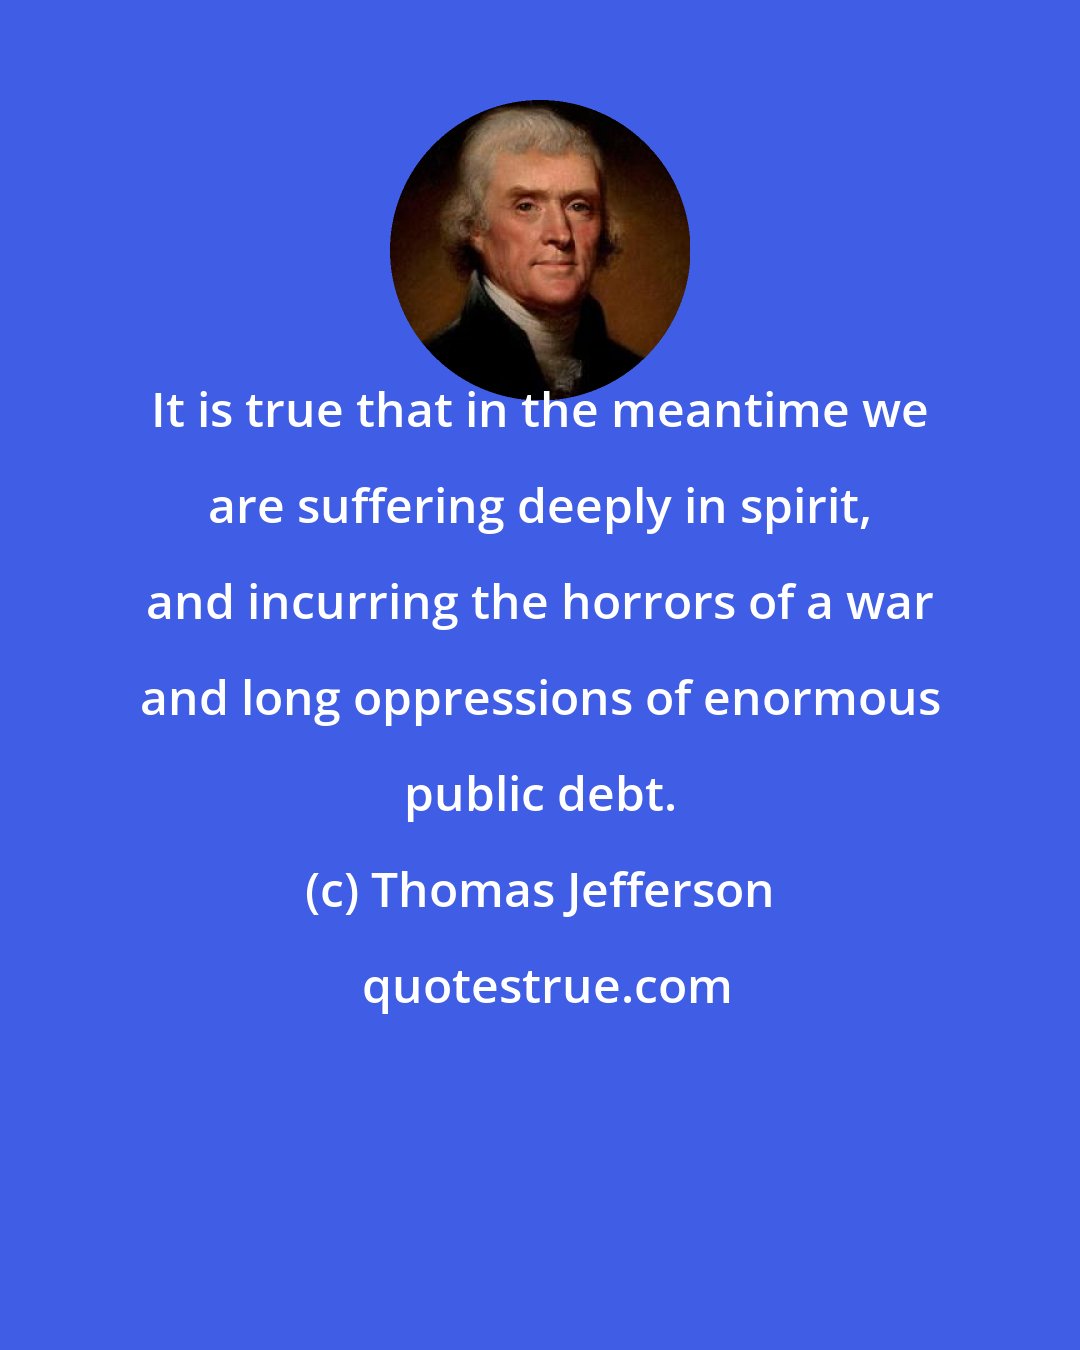 Thomas Jefferson: It is true that in the meantime we are suffering deeply in spirit, and incurring the horrors of a war and long oppressions of enormous public debt.